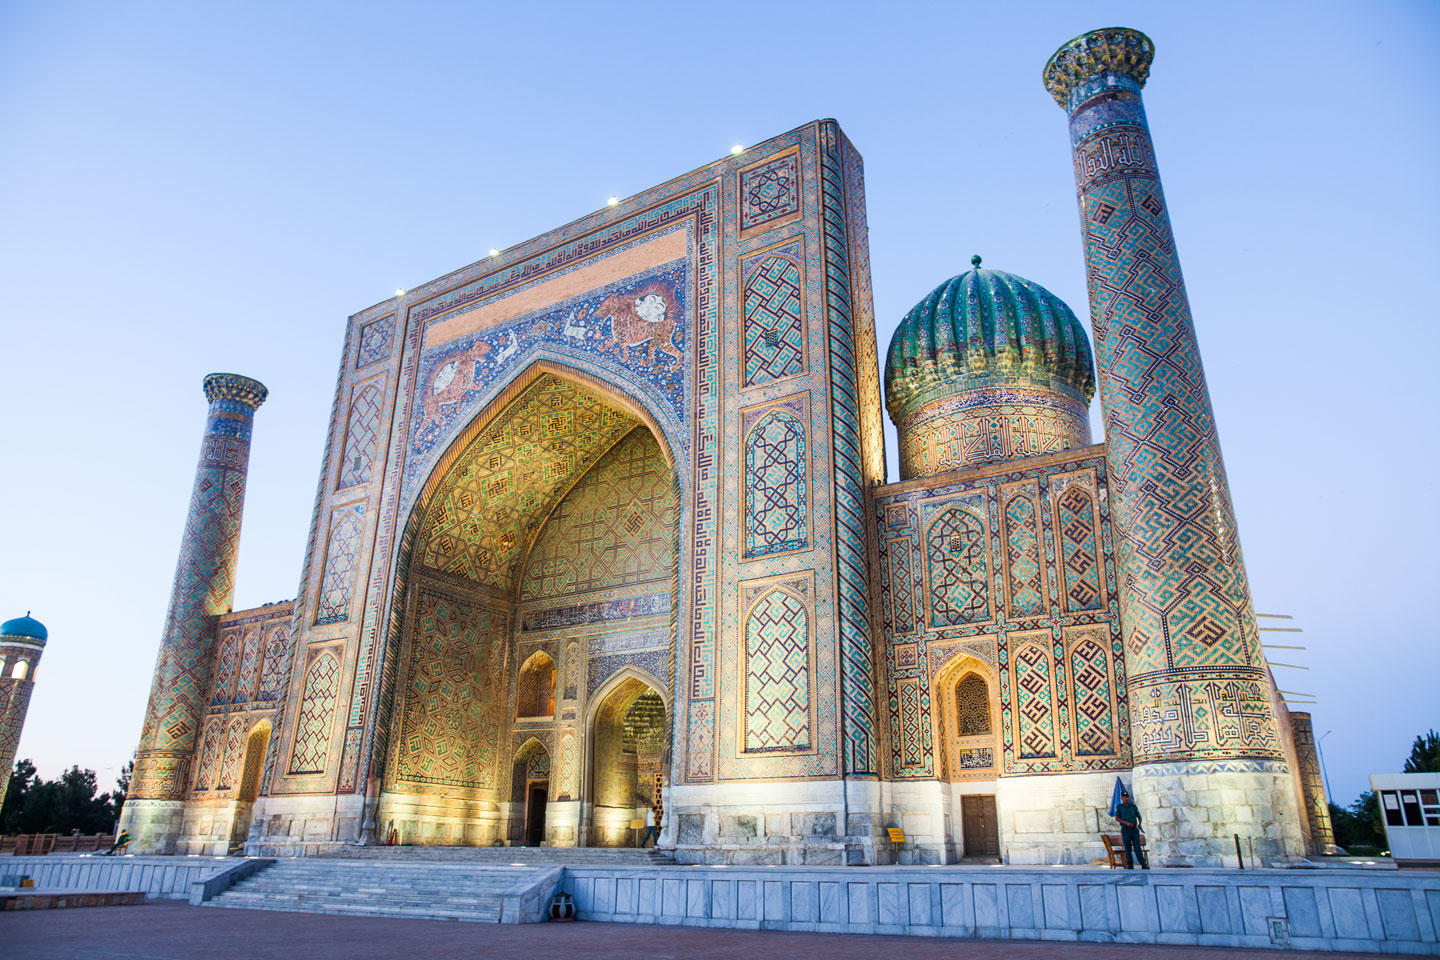 Part of the Registan Square in Samarkand